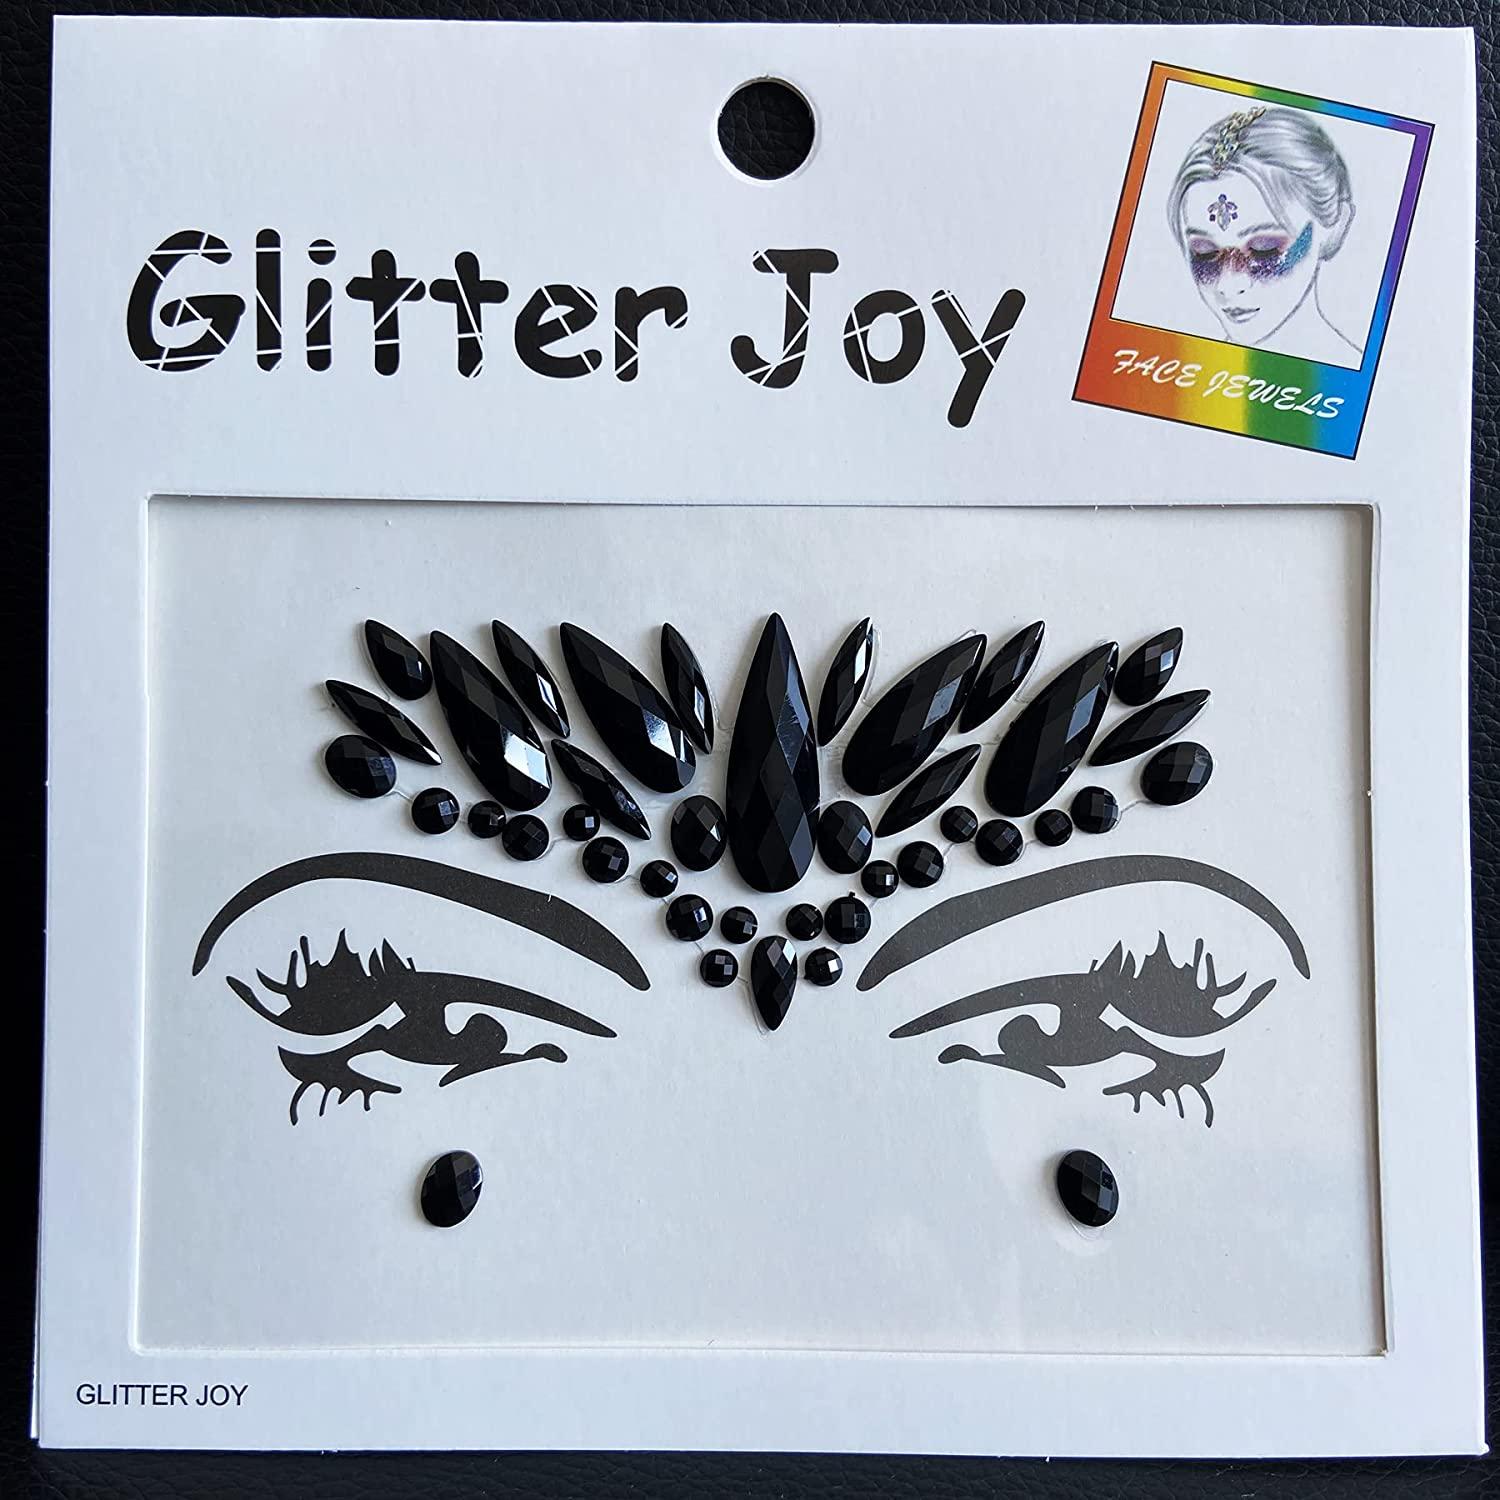 Rhinestone Facial Tattoo Sticker For Party, Face Jewels Festival Makeup Eye  Jewels Stick On Rhinestone For Face, Hair, Body, Eye Black Friday